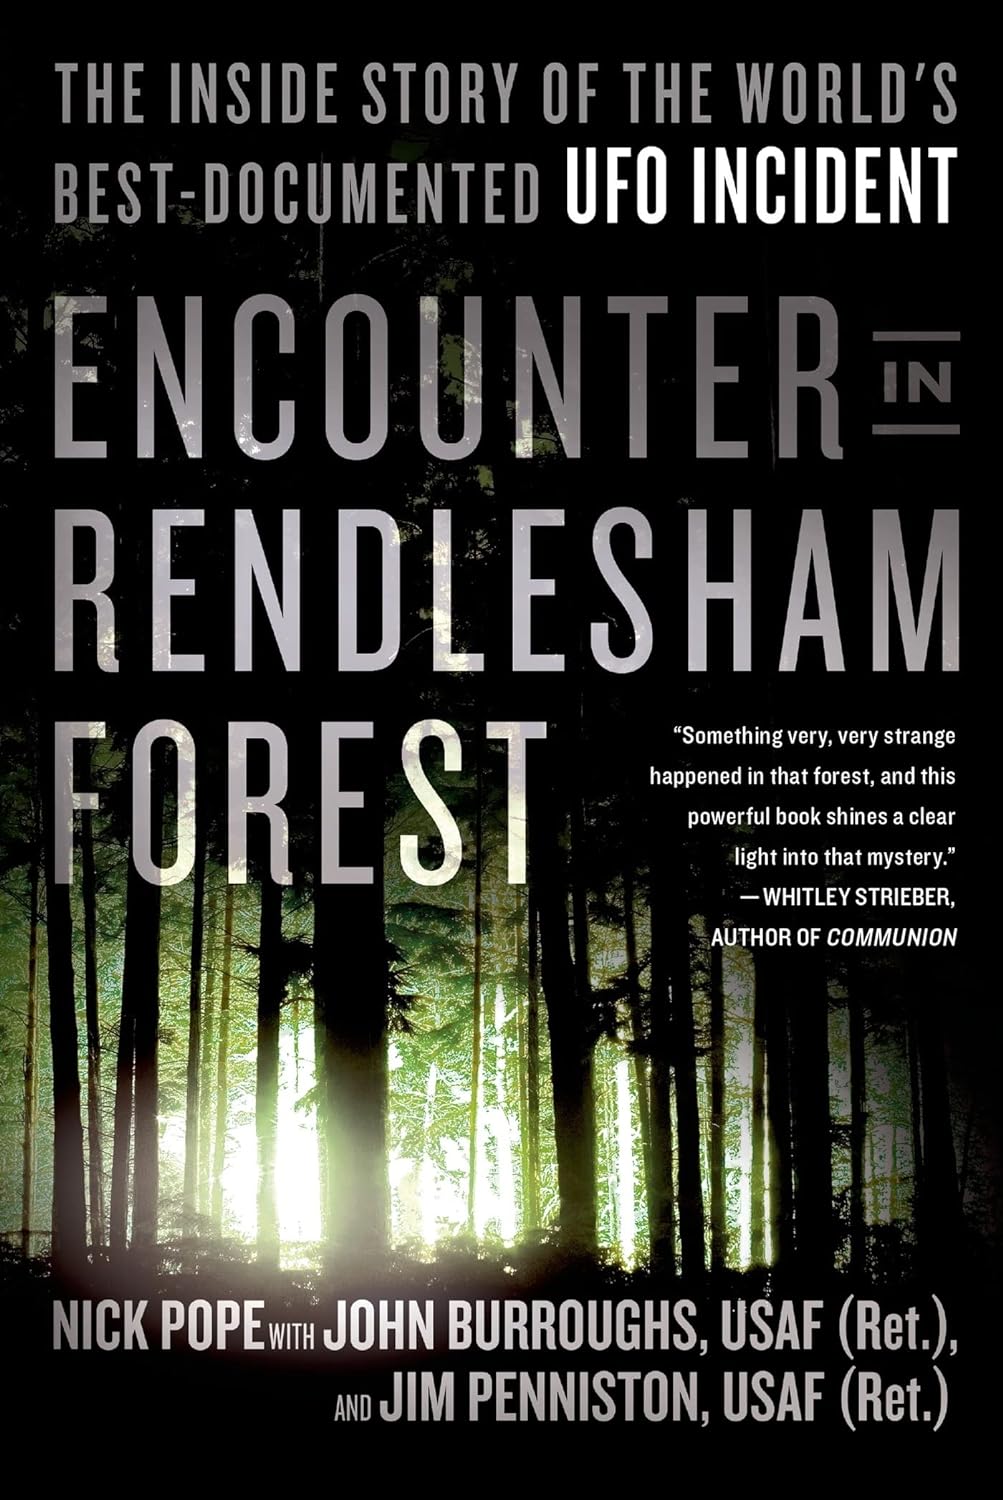 "Encounter in Rendlesham Forest" by Nick Pope, John Burroughs, and Jim Penniston
About the Book and Authors: This book provides an in-depth look at the Rendlesham Forest incident, often referred to as Britain's Roswell. Nick Pope, a former UFO investigator for the UK's Ministry of Defence, teams up with John Burroughs and Jim Penniston, two of the servicemen who directly experienced the event, to offer a comprehensive account of what they describe as a close encounter.

Unique Take: What makes this book compelling is its combination of authoritative government insight with firsthand witness testimonies. Readers are drawn to the detailed exploration of the incident, appreciating the mix of personal narrative and official investigation into one of the most well-documented UFO encounters.